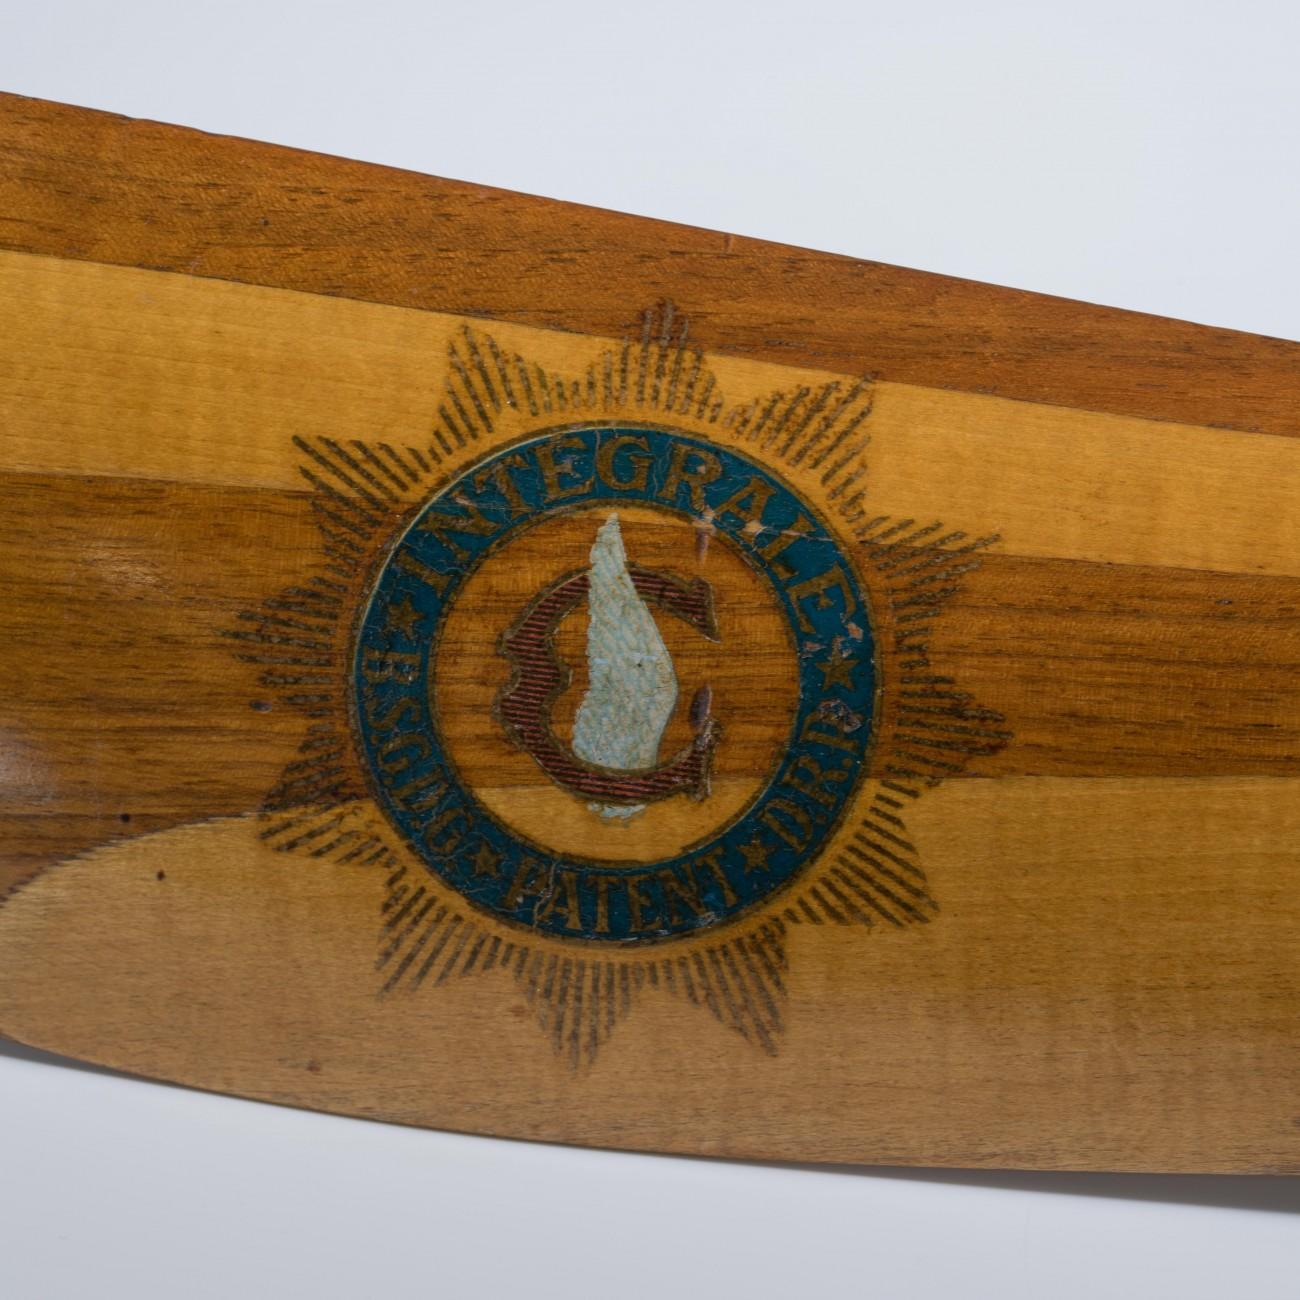 This wonderful scaled down laminated carved wooden ‘sample’ propeller was made in a similar way to full size propellers of this era; circa 1914. It has the international decall from Integrale when they had workshops in Germany and Britain as well as